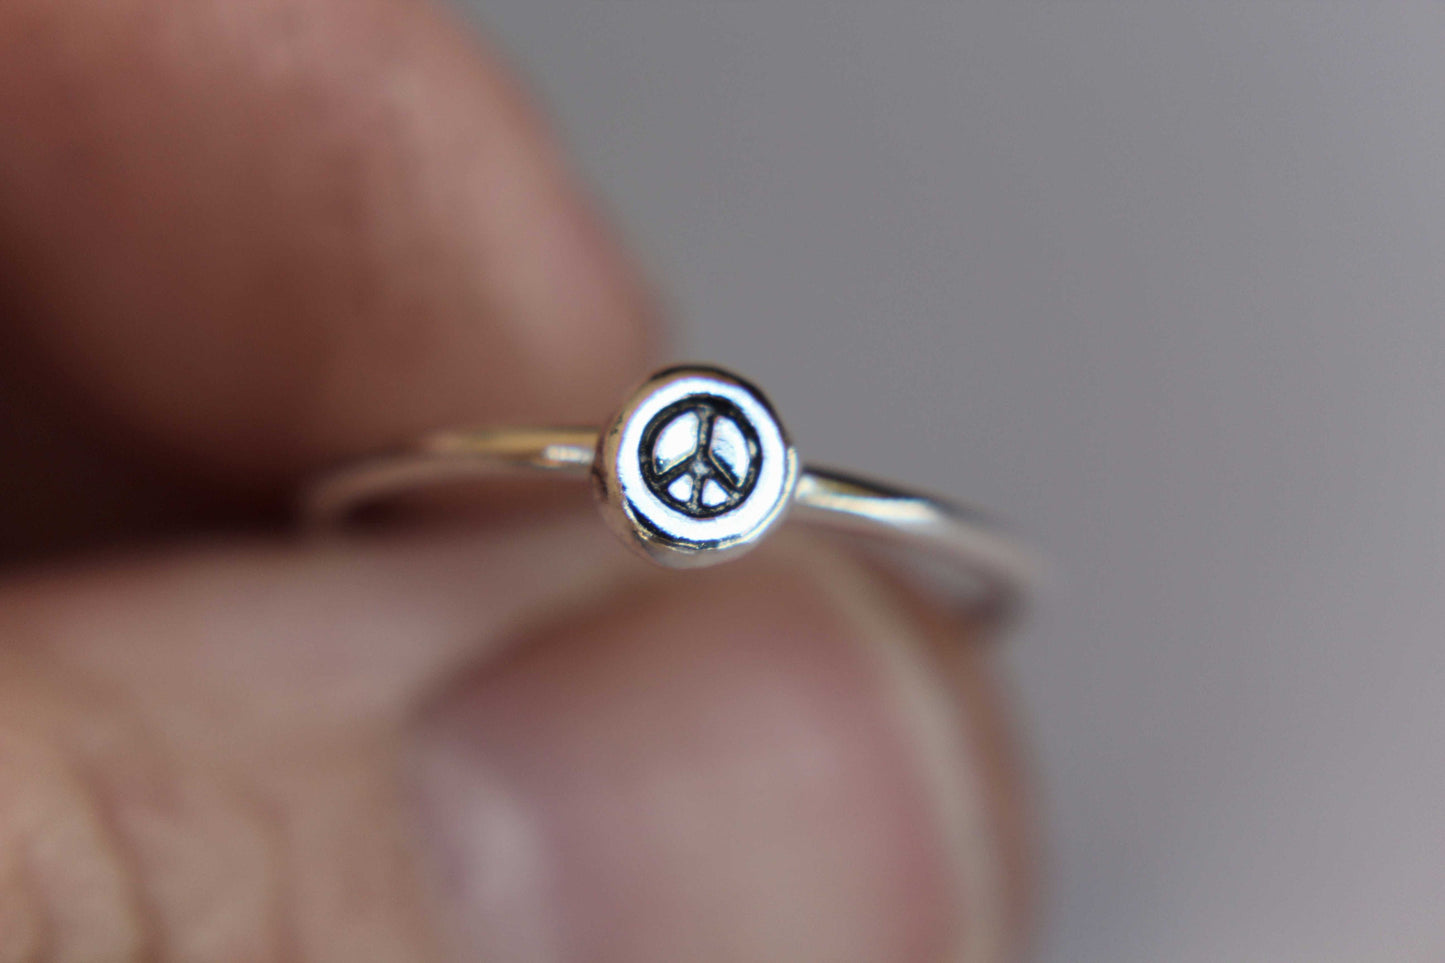 Peace Sign Ring, Peace, Peace Jewelry, Metalwork, Minimalist, Boho Hippie Fashion, Friendship, Gift, Small Peace Sign Ring